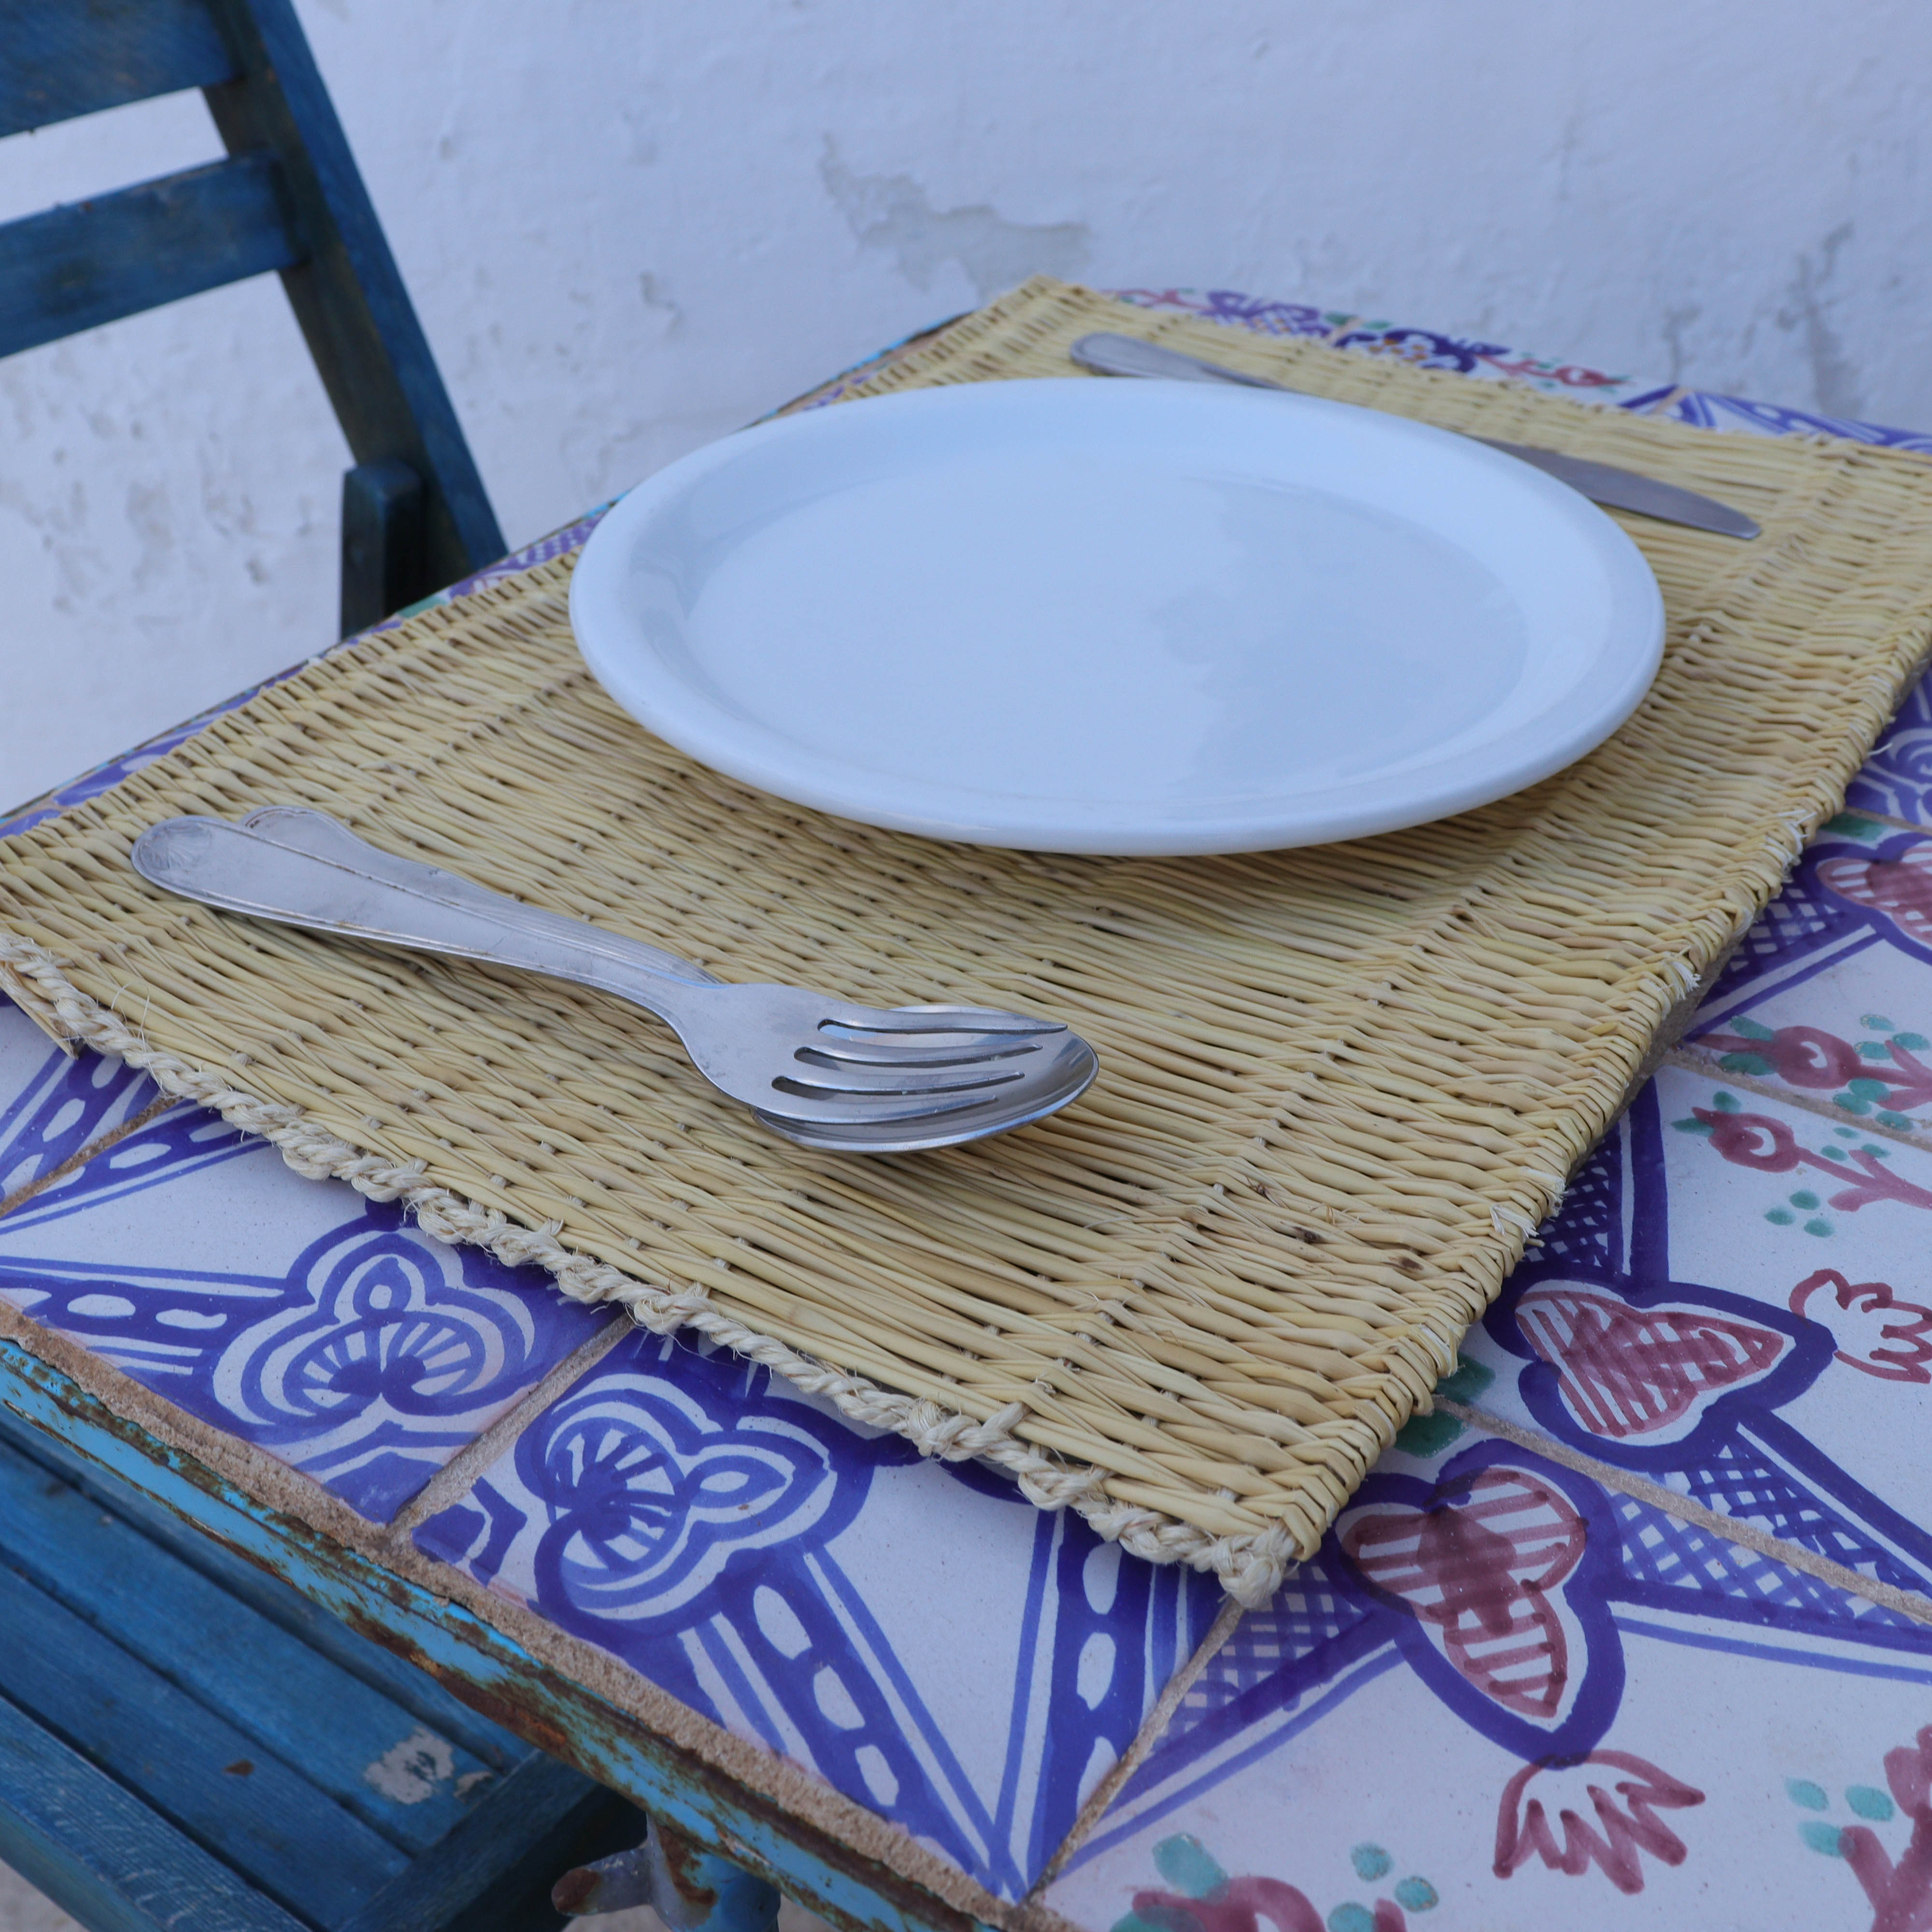 Product.Rectangular placemat in hand-braided rush - dining table decoration  - Handmade - natural - 50x30cm